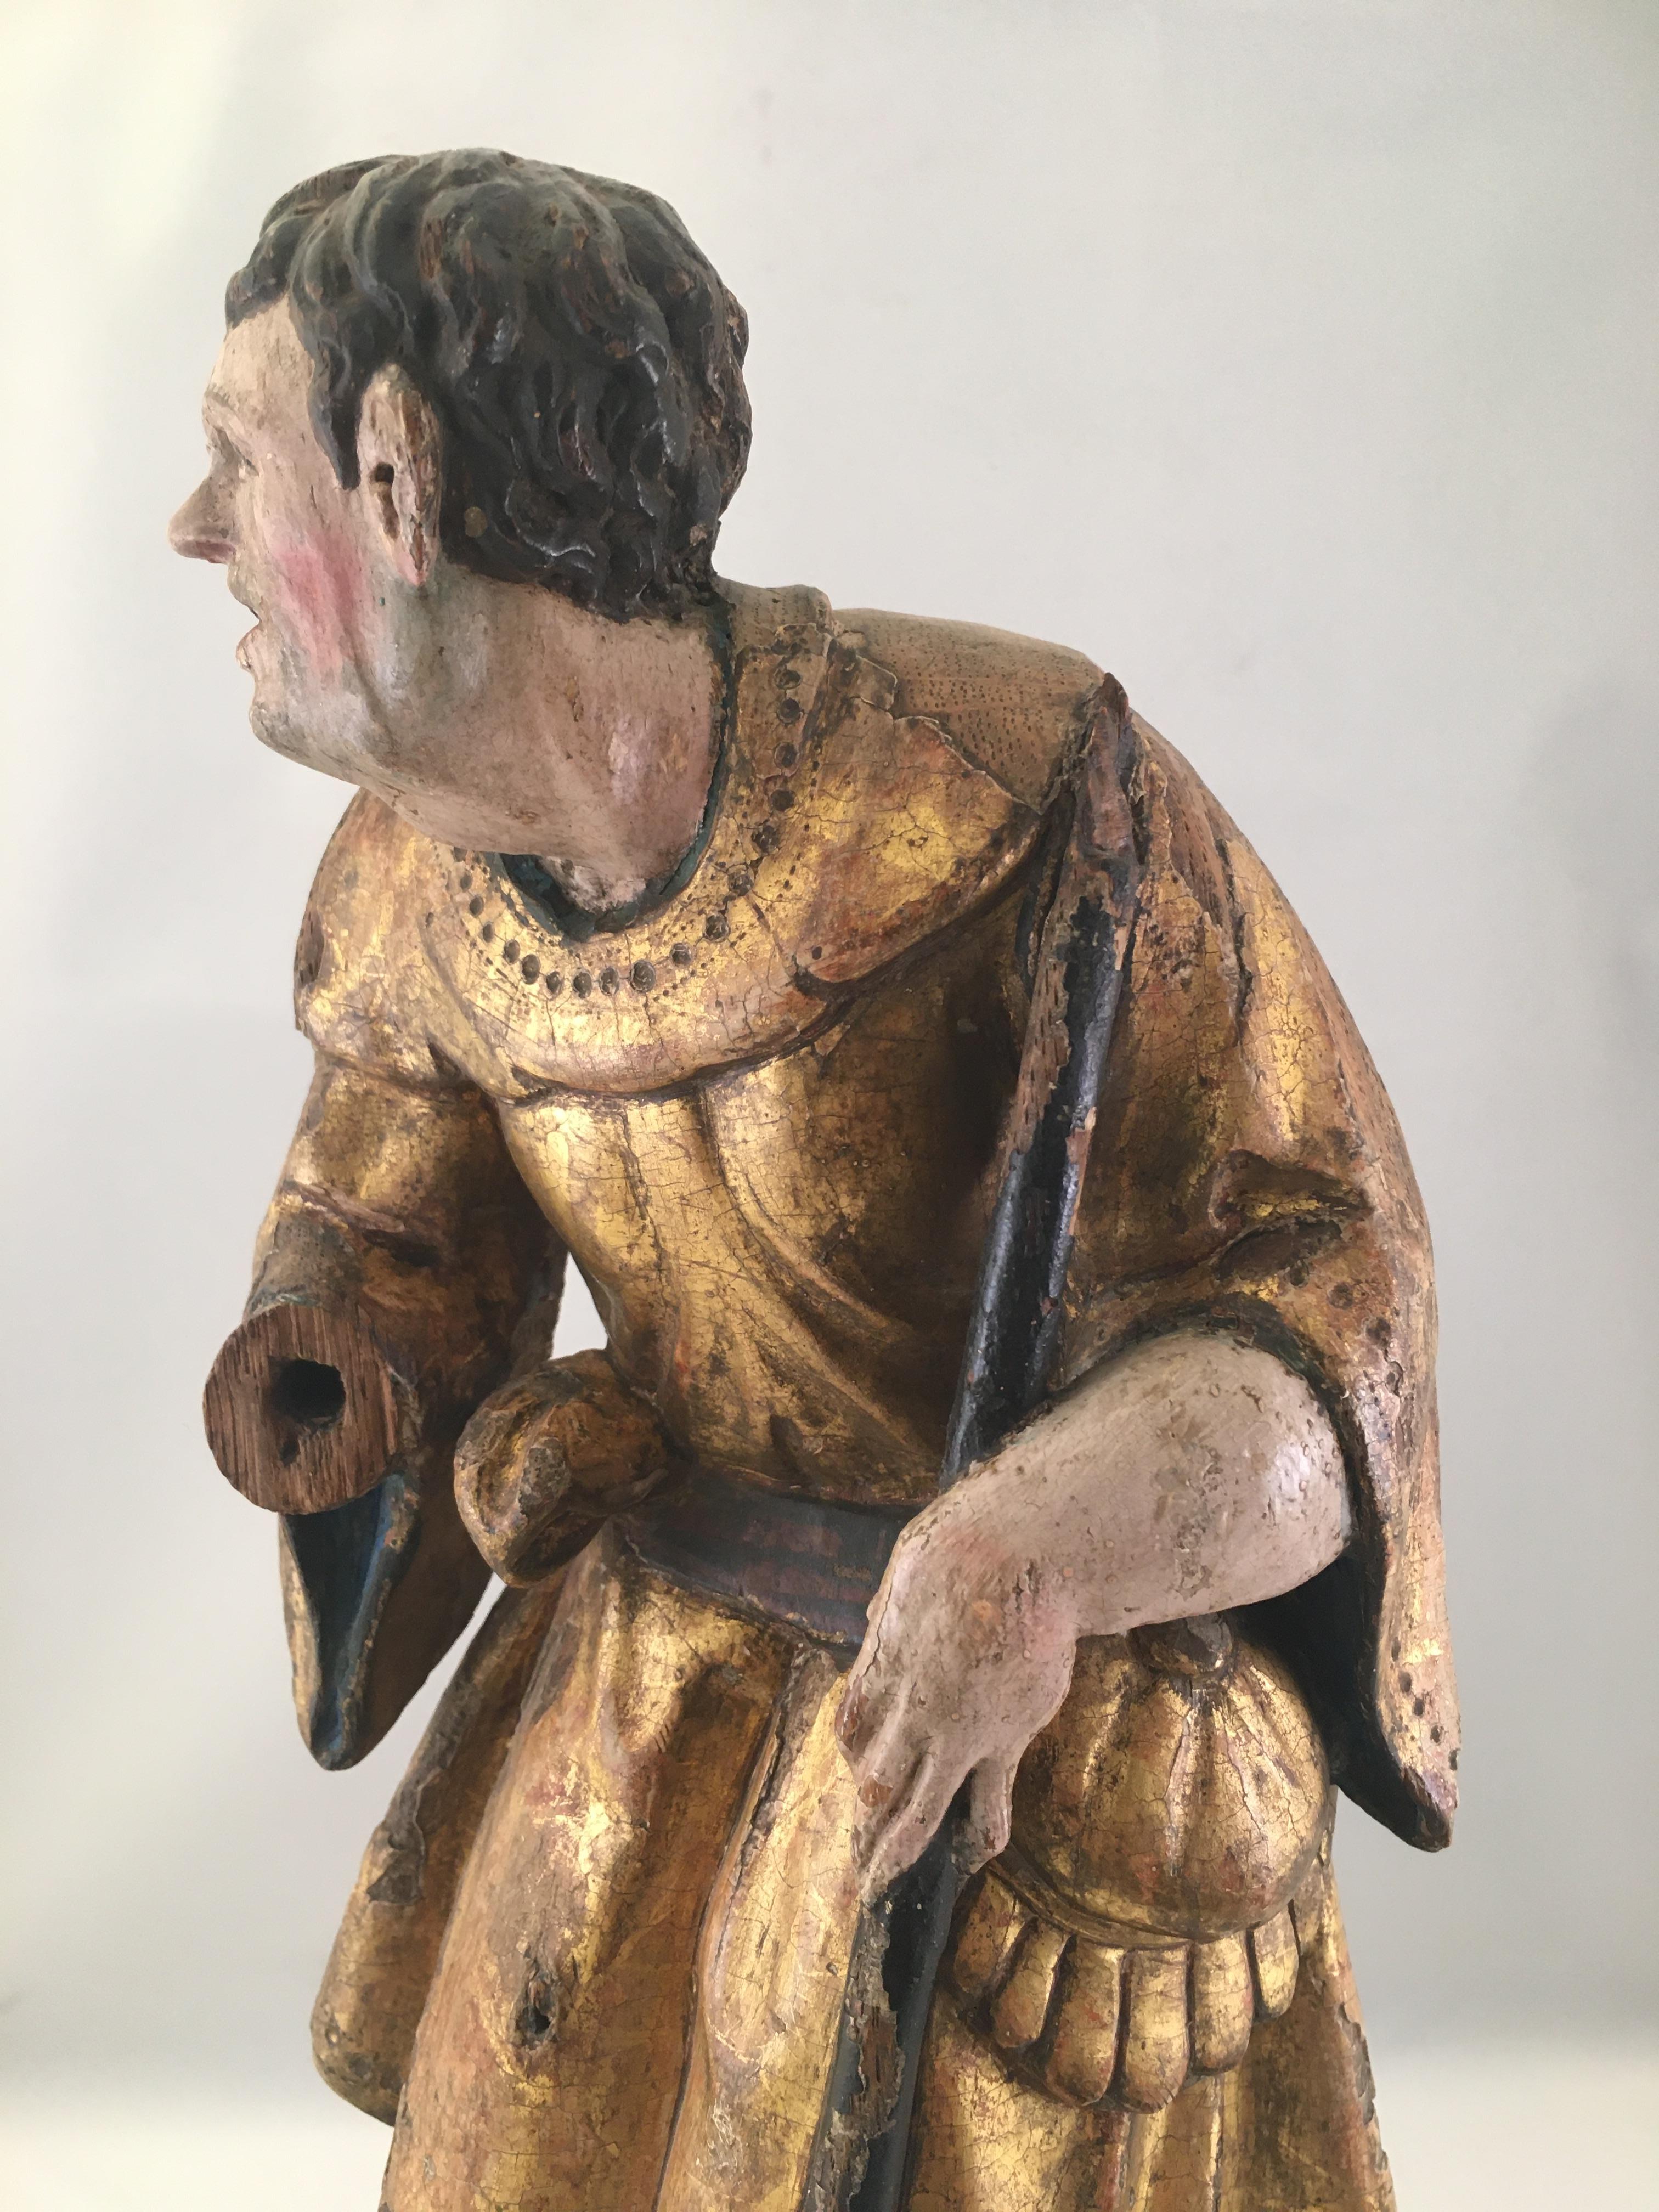 A polychromed wooden sculpture (a shepherd). Part of a retable piece - scene from the adoration of the shepherds.
Antwerp (Flanders) - early 16th century, and marked twice with the Antwerp hand (head and base).
Flattened at the back. The shepherd